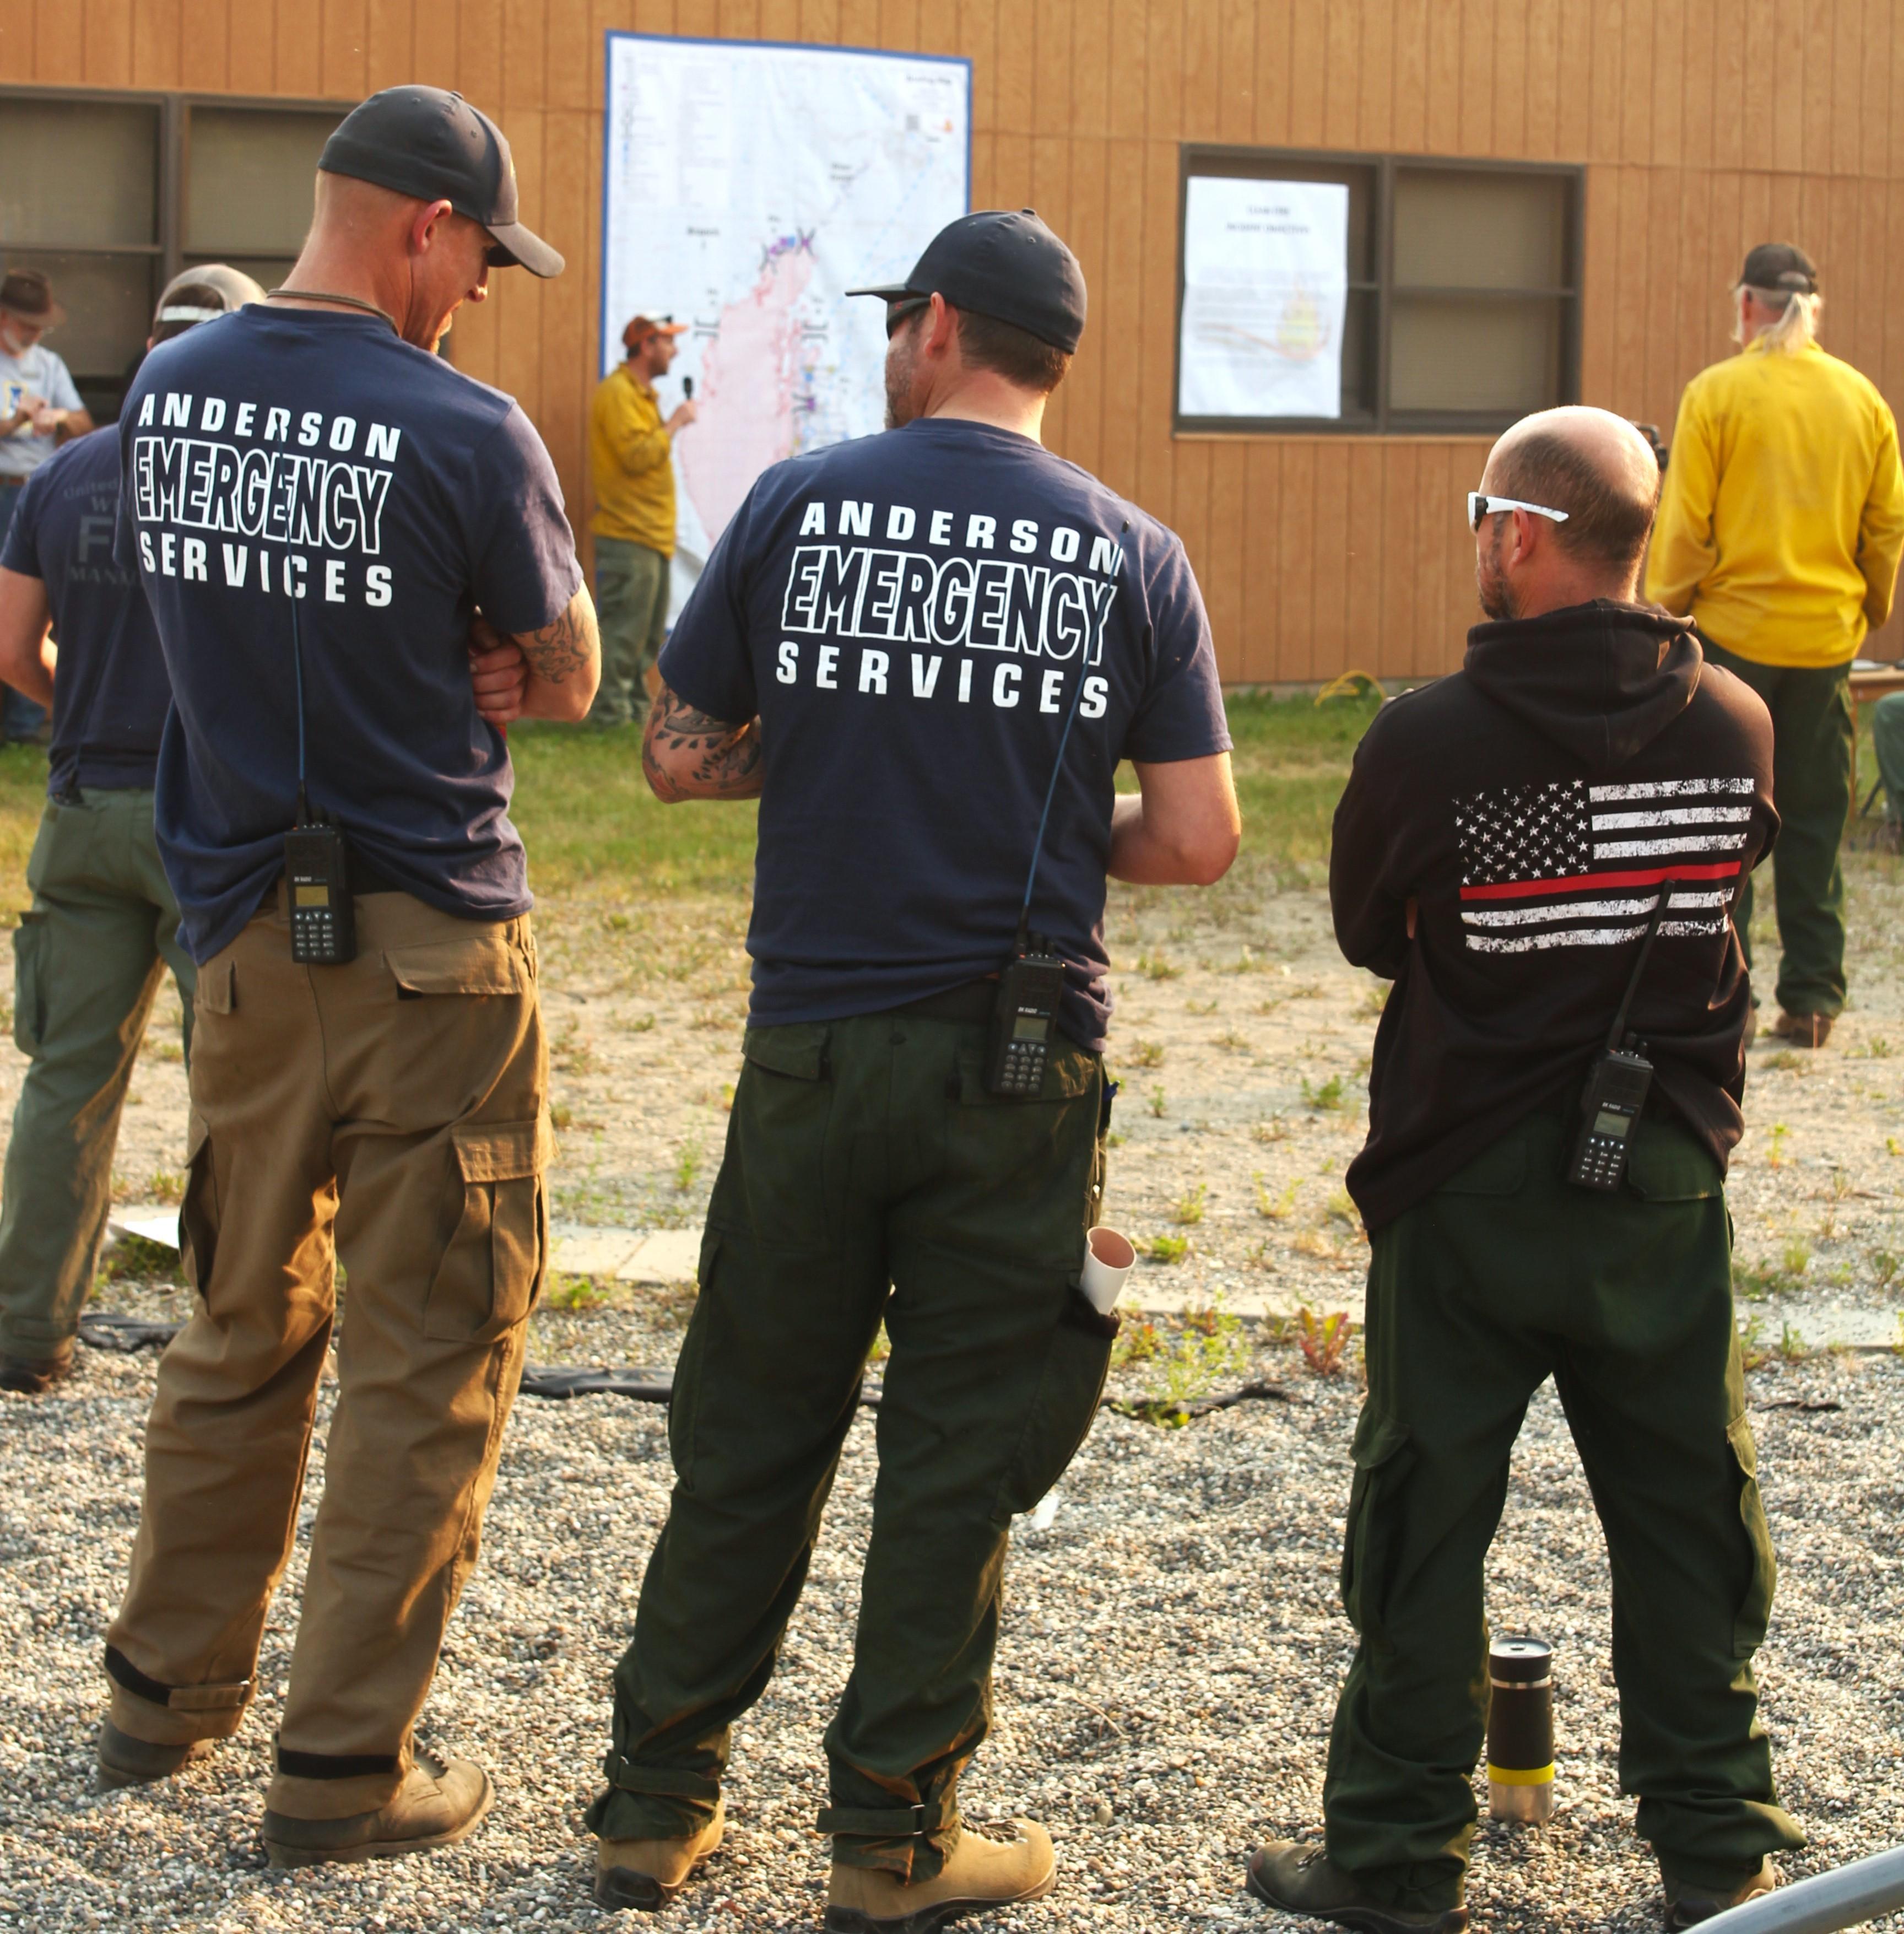 Anderson Emergency Services at Clear Fire Briefing on July 4, 2022